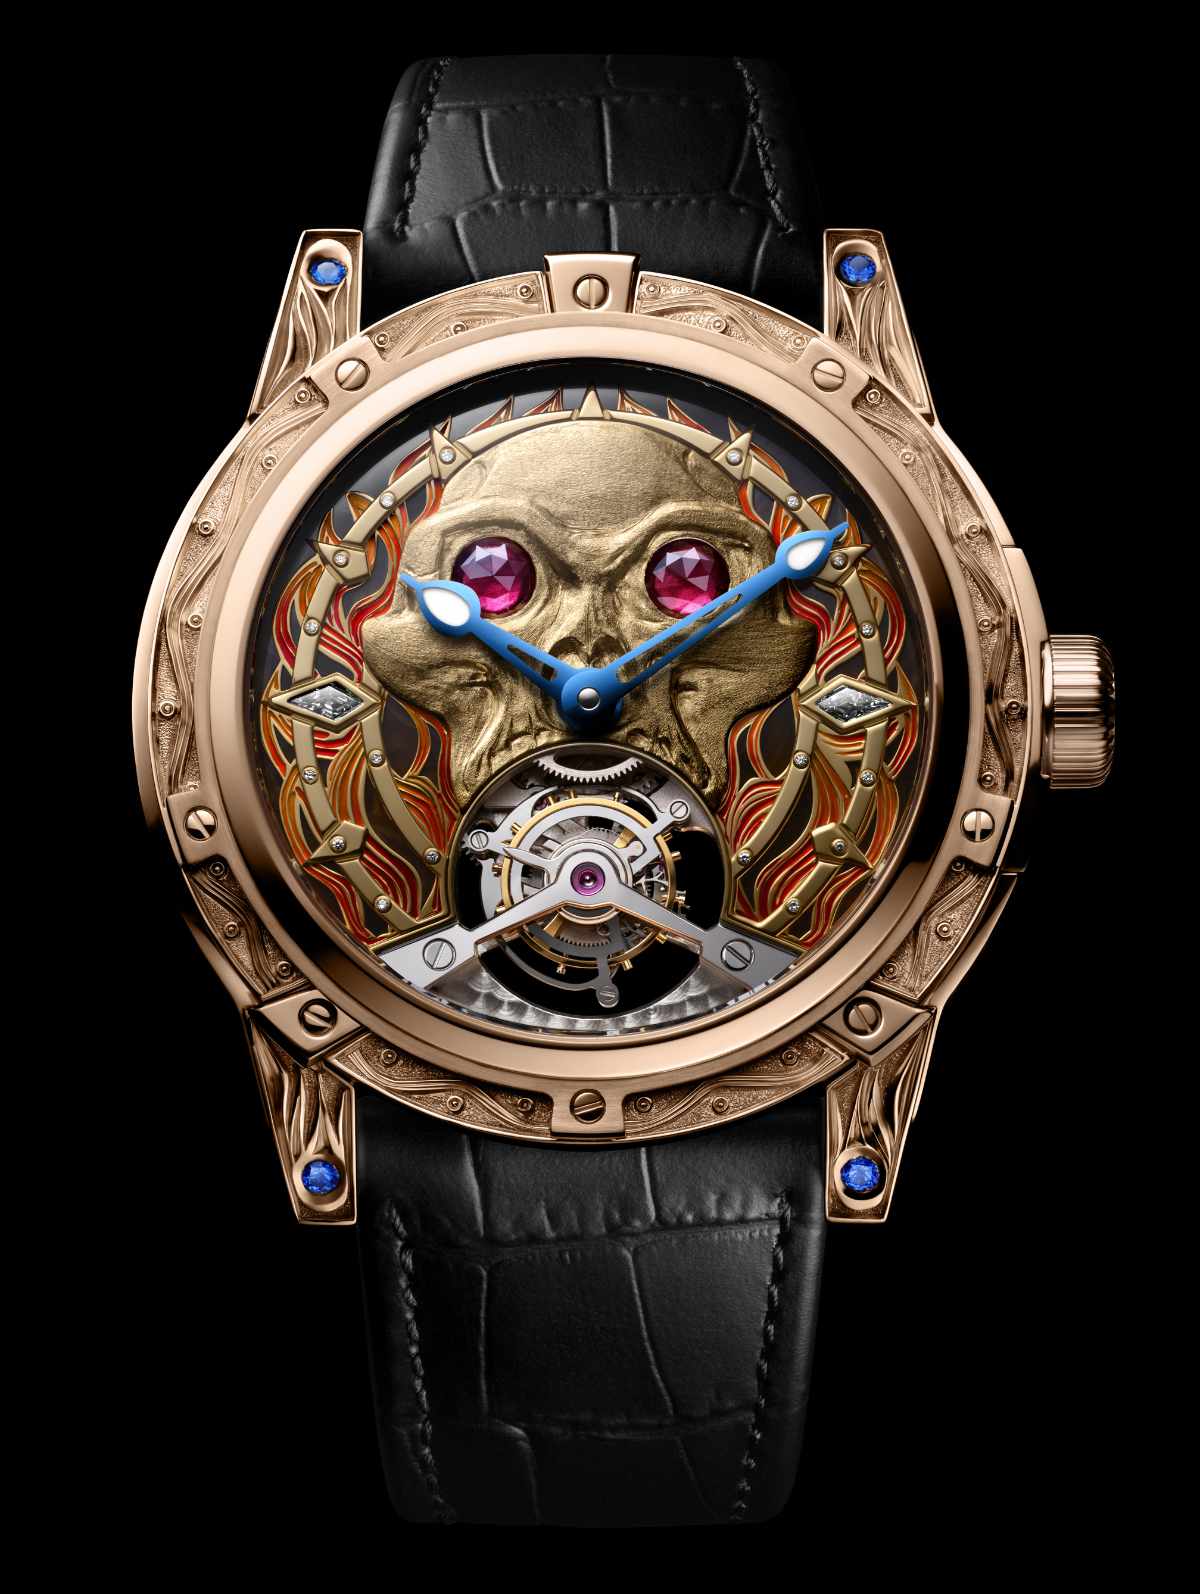 Louis Moinet's HEAT: The Conquest Of Fire